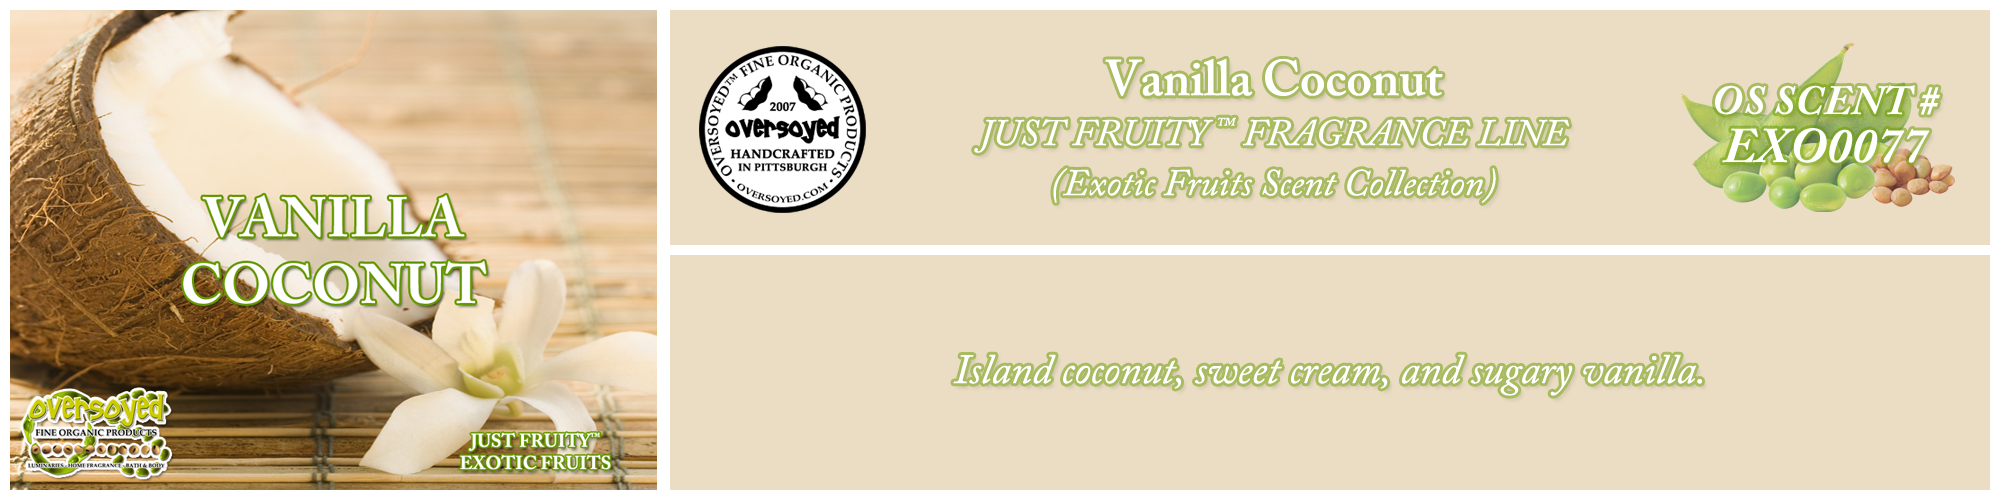 Vanilla Coconut Handcrafted Products Collection